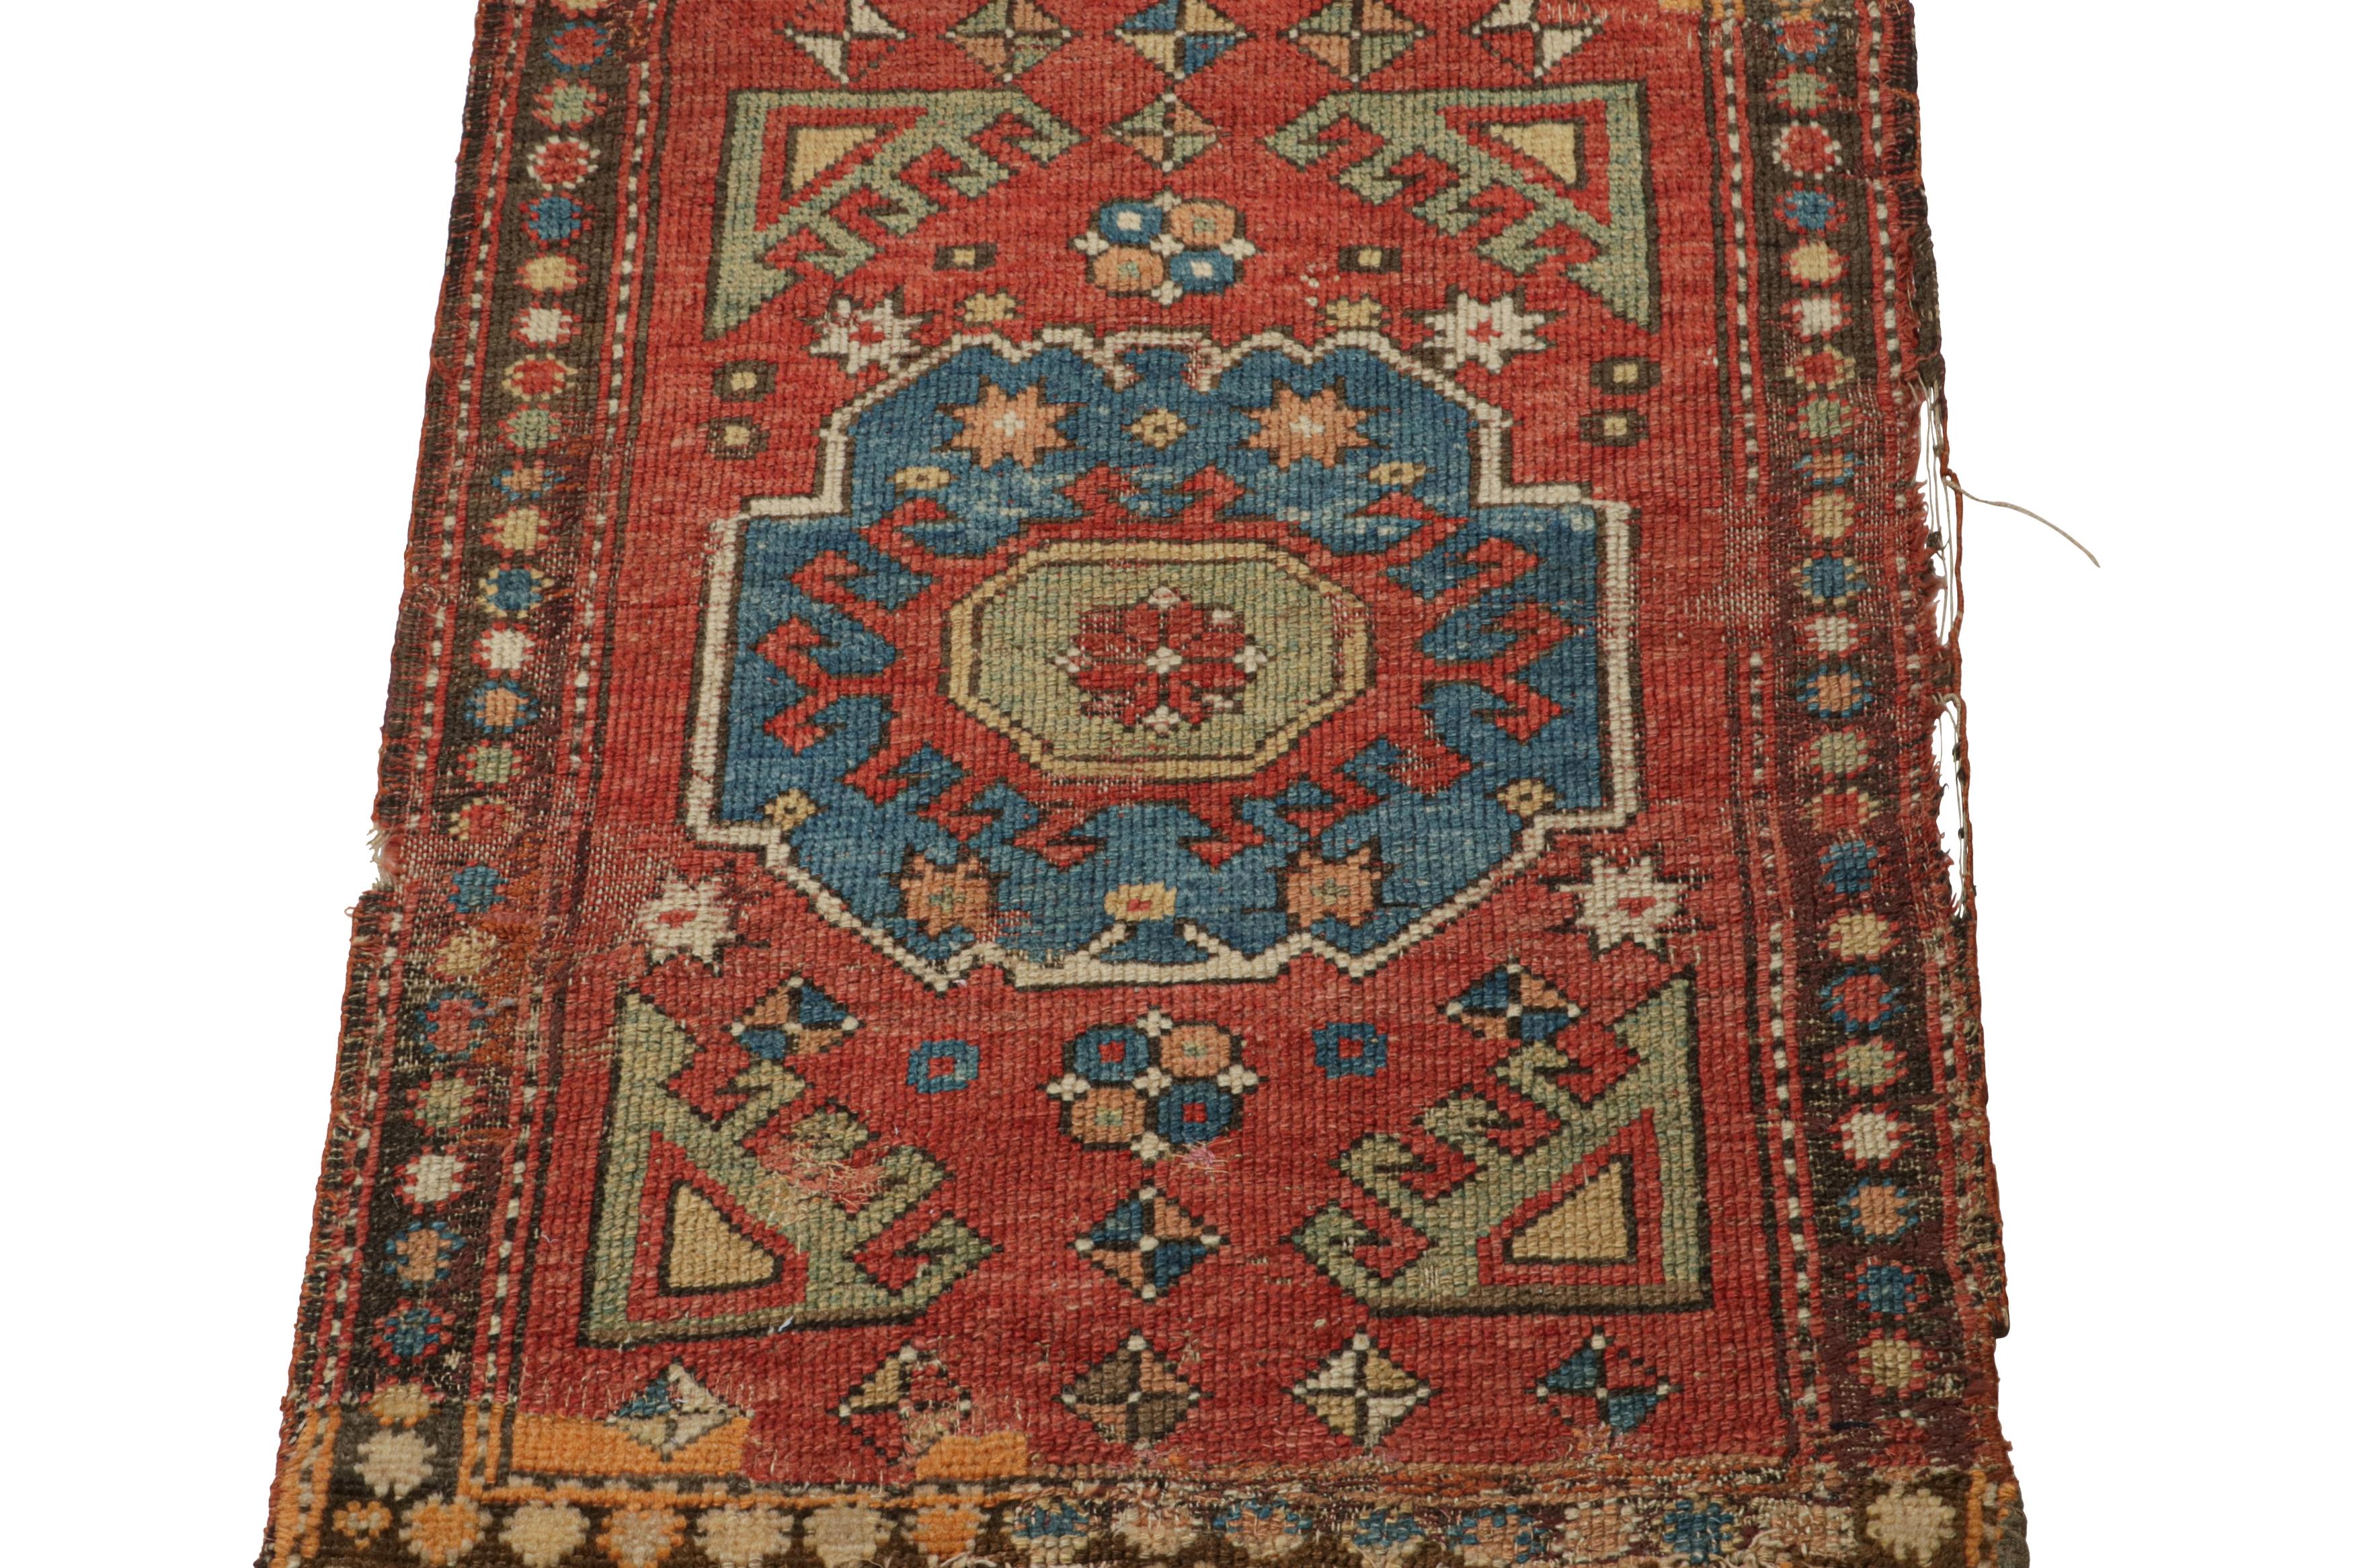 Hand-knotted in wool circa1910-1920, this 2x3 scatter rug is an antique Bergama rug, from the tribal weaving tradition of the same name in Turkey near the Aegean sea.

On the Design:

This gift sized piece enjoys large medallions and other geometric